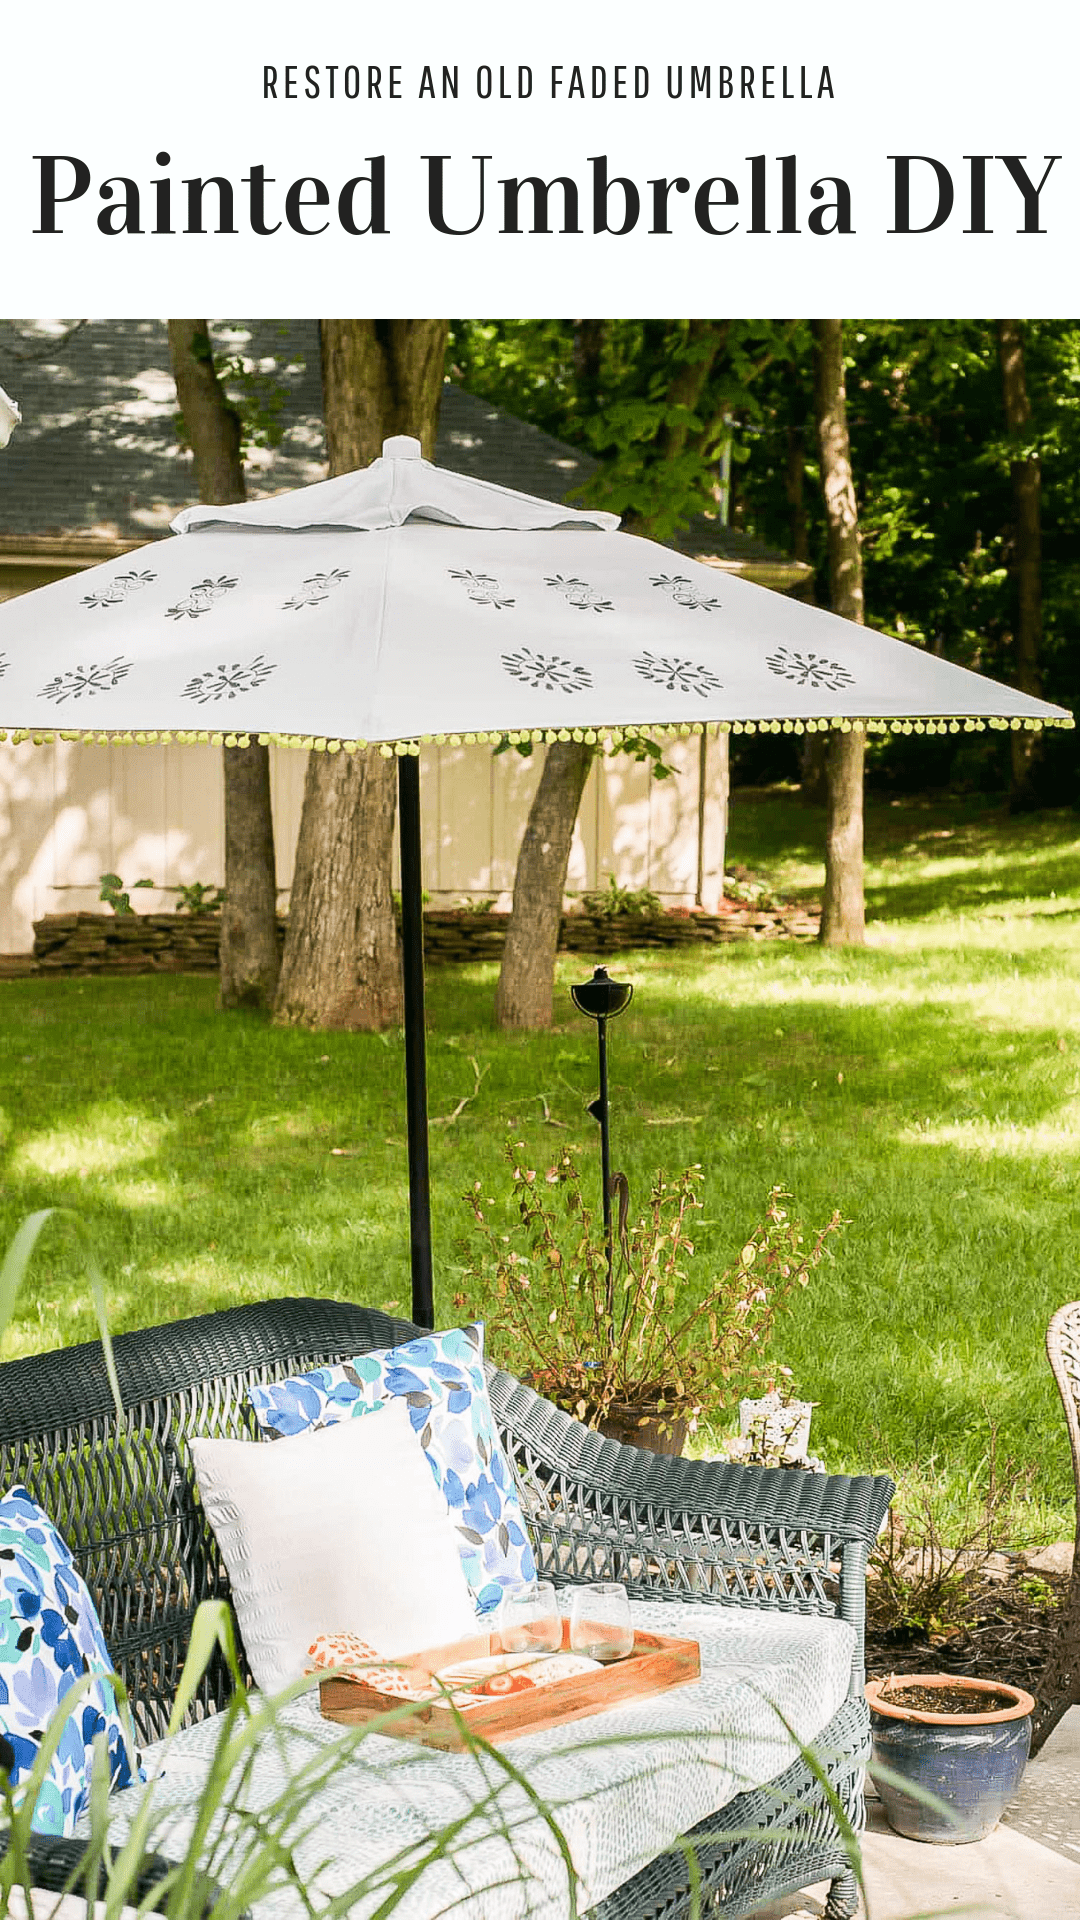 Outdoor fabric paint makeover on patio umbrella. Make a faded umbrella look brand new with this project idea!